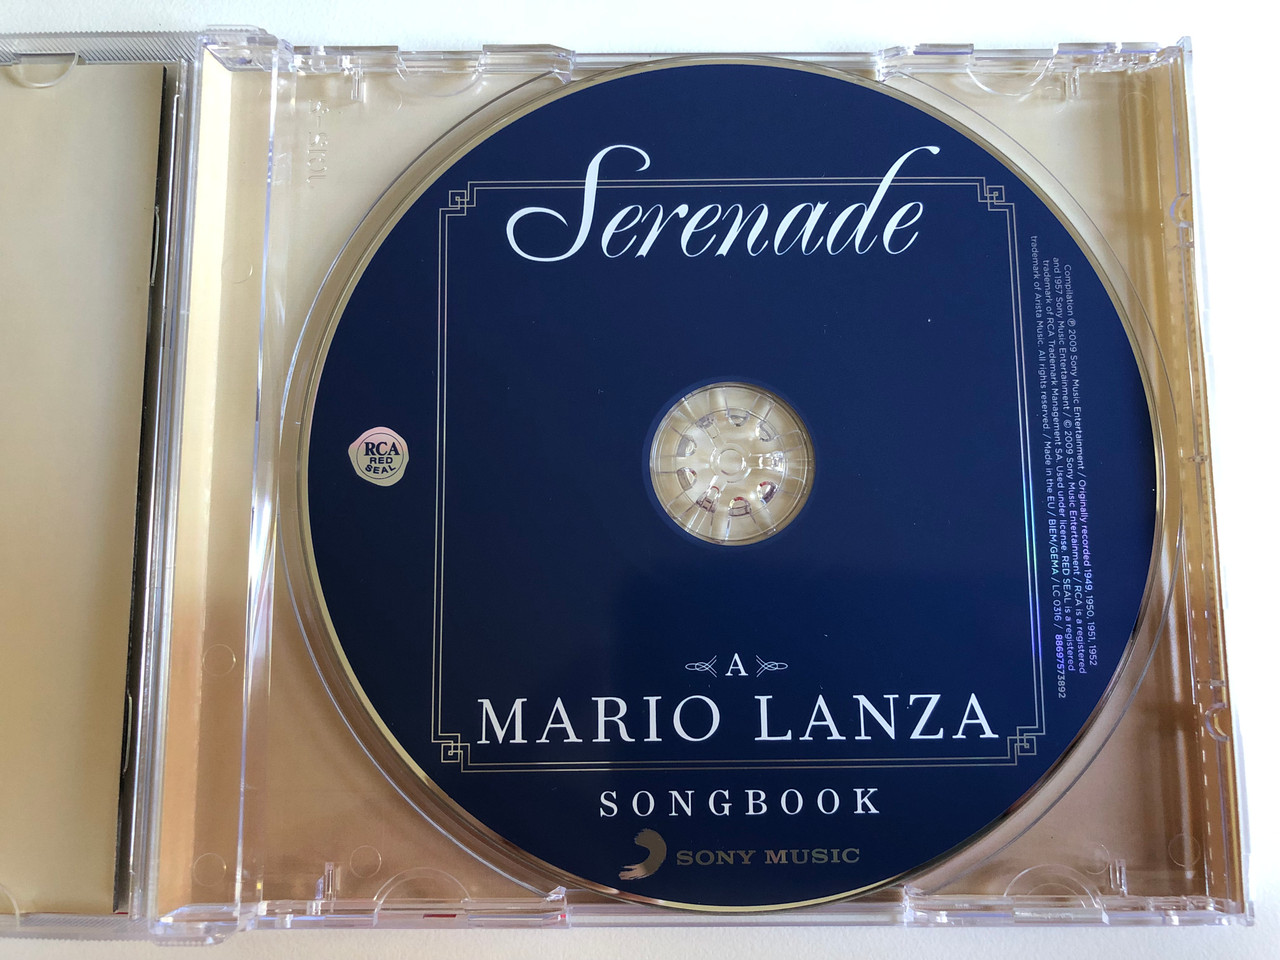 https://cdn10.bigcommerce.com/s-62bdpkt7pb/products/0/images/208109/Serenade_-_Mario_Lanza_-_Songbook_The_Ultimate_Collection_Featuring_7_Previously_Unreleased_Recordings_RCA_Red_Seal_Audio_CD_2009_88697573892_3__96306.1642659735.1280.1280.JPG?c=2&_gl=1*r6i08d*_ga*MjA2NTIxMjE2MC4xNTkwNTEyNTMy*_ga_WS2VZYPC6G*MTY0MjY1NTc3MC4yNjcuMS4xNjQyNjU5NTE2LjQy